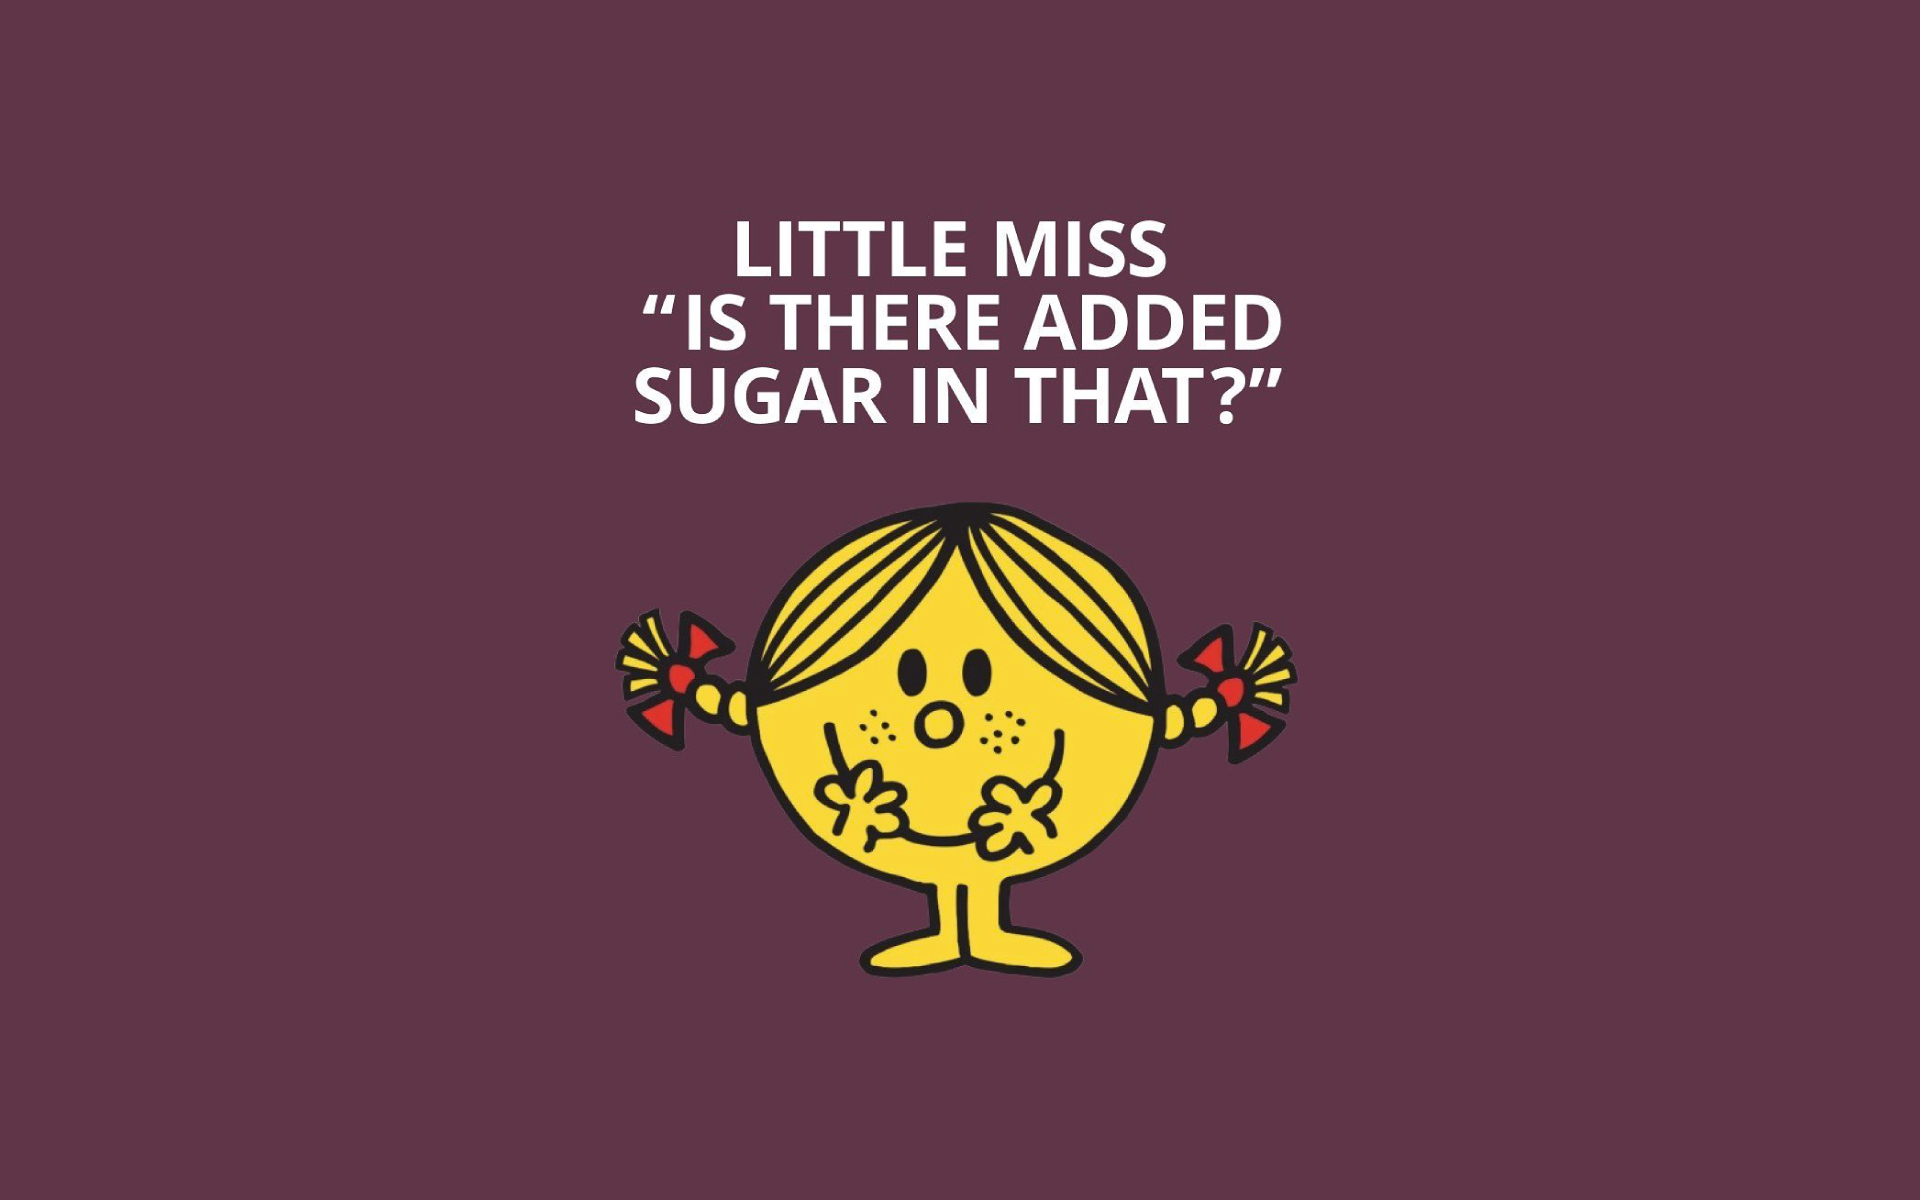 High Fructose foods & Little Miss is there sugar added to that